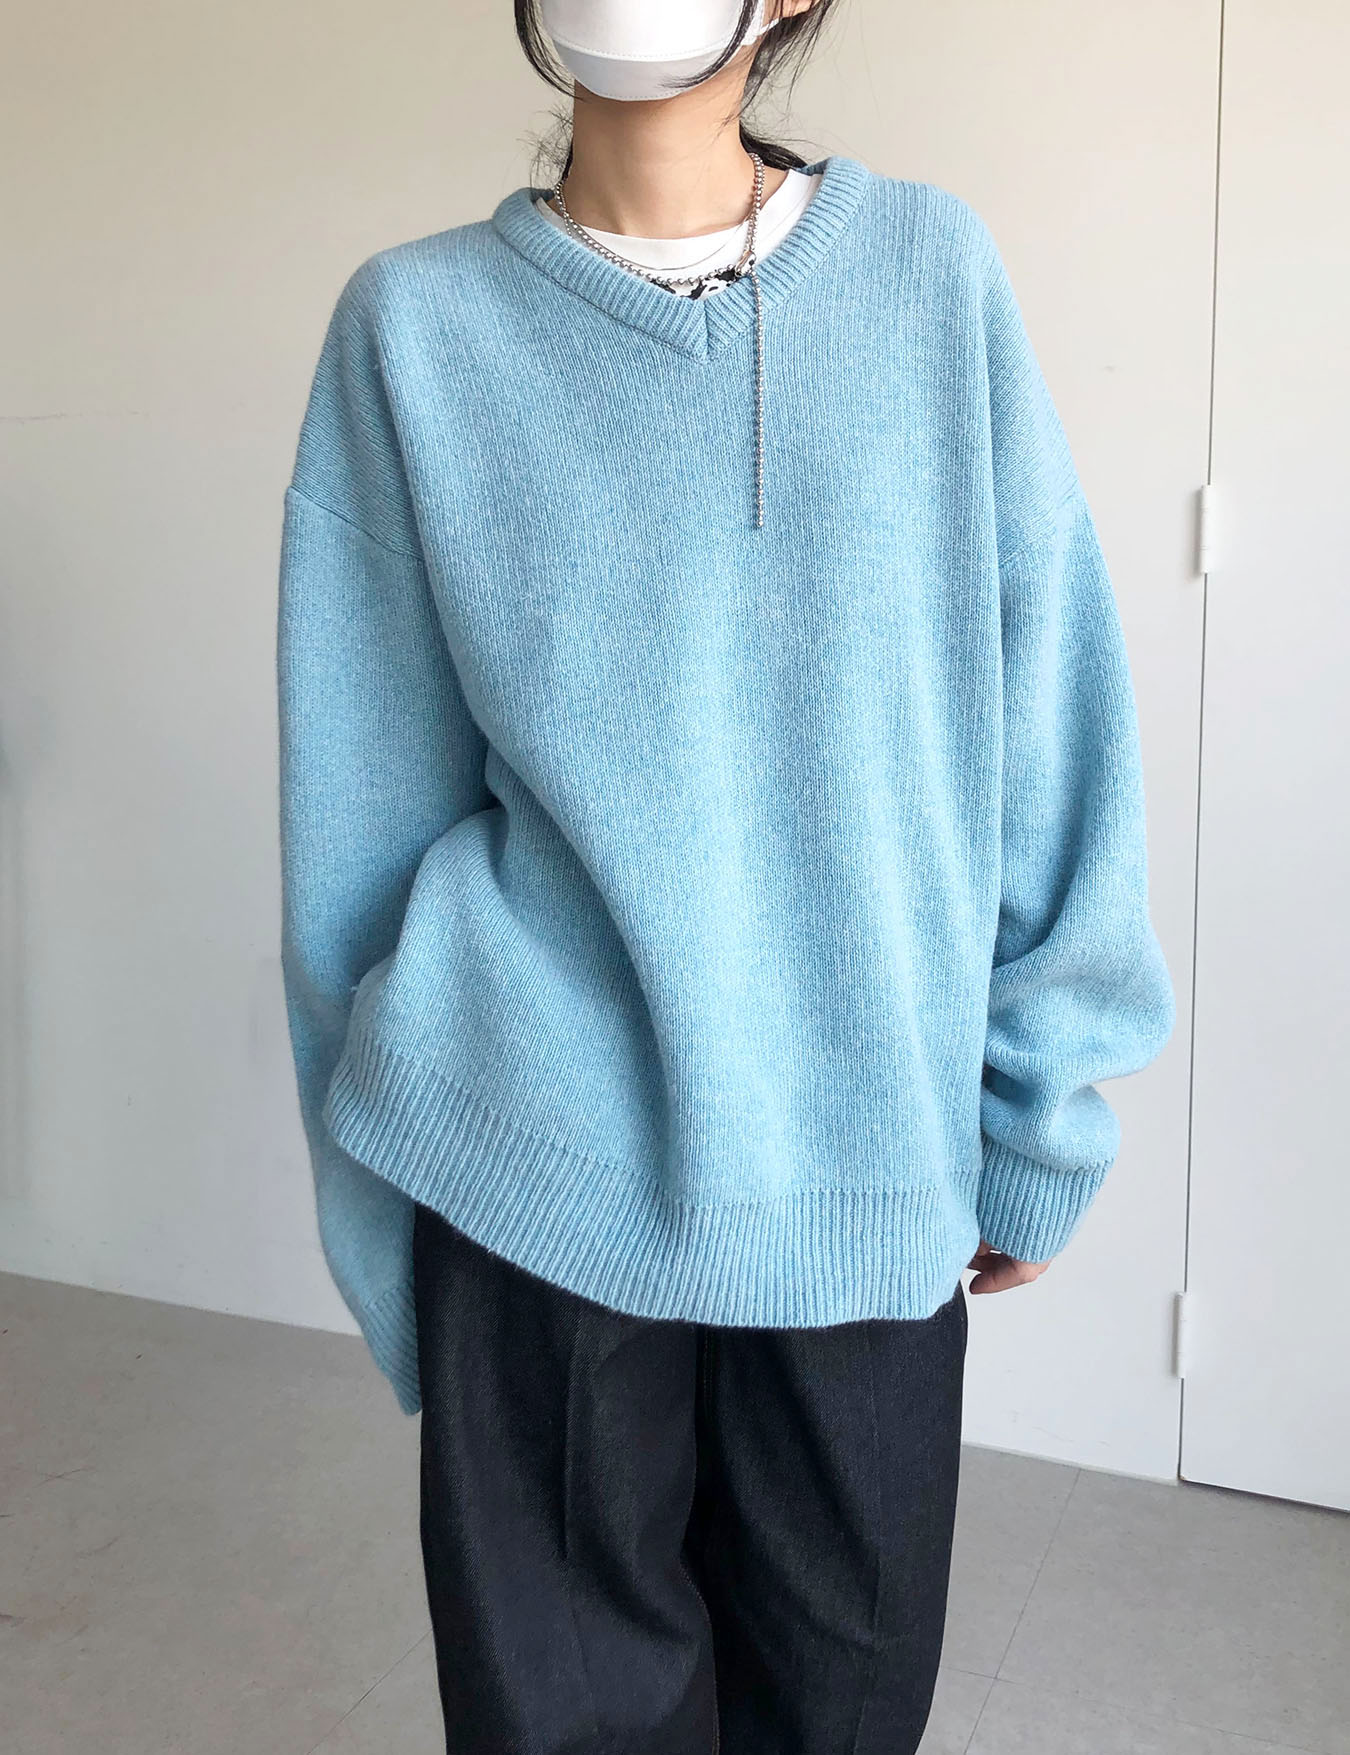 md추천 / lambswool oversized knit (5color)